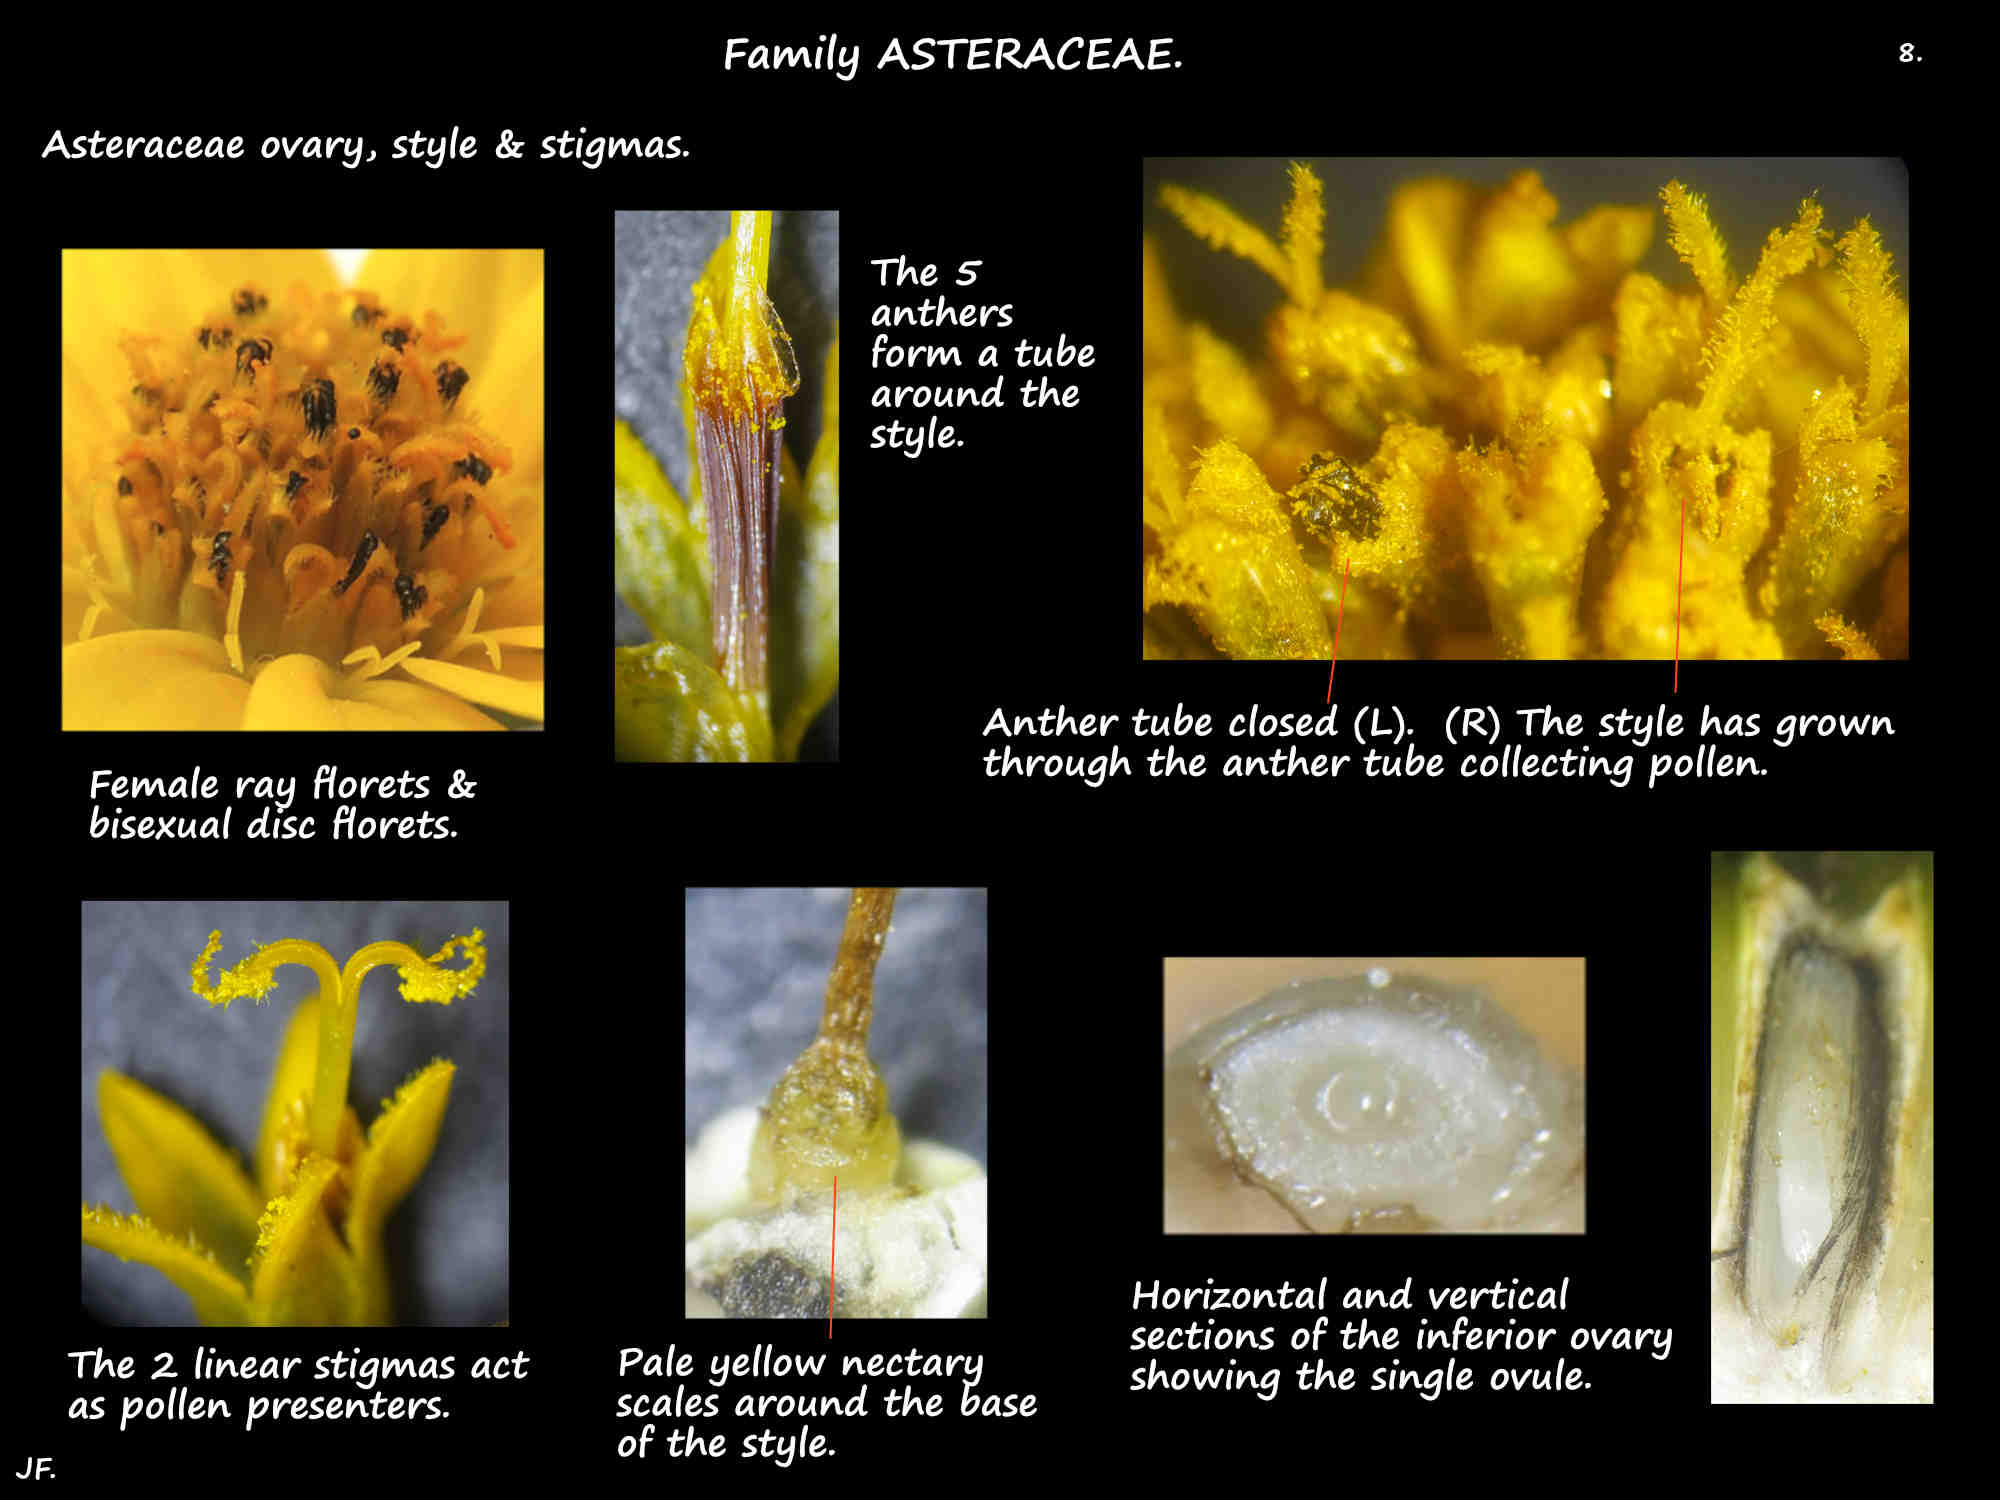 8 The stamens, ovary, style & stigmas in Asteraceae florets